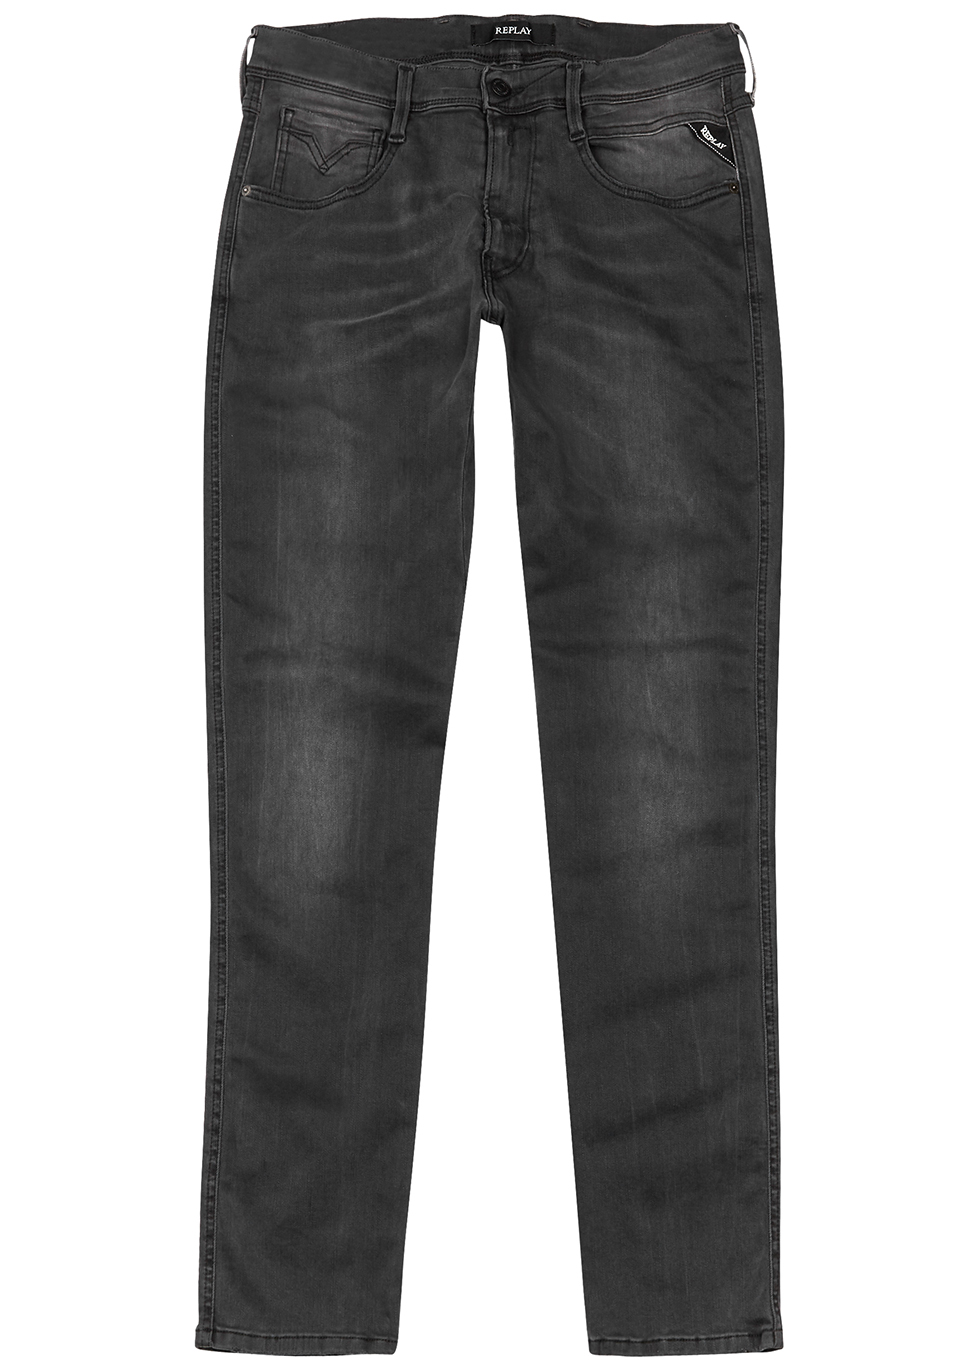 Replay Mens Anbass Hyperflex Jeans in Black Cottonlim Fit